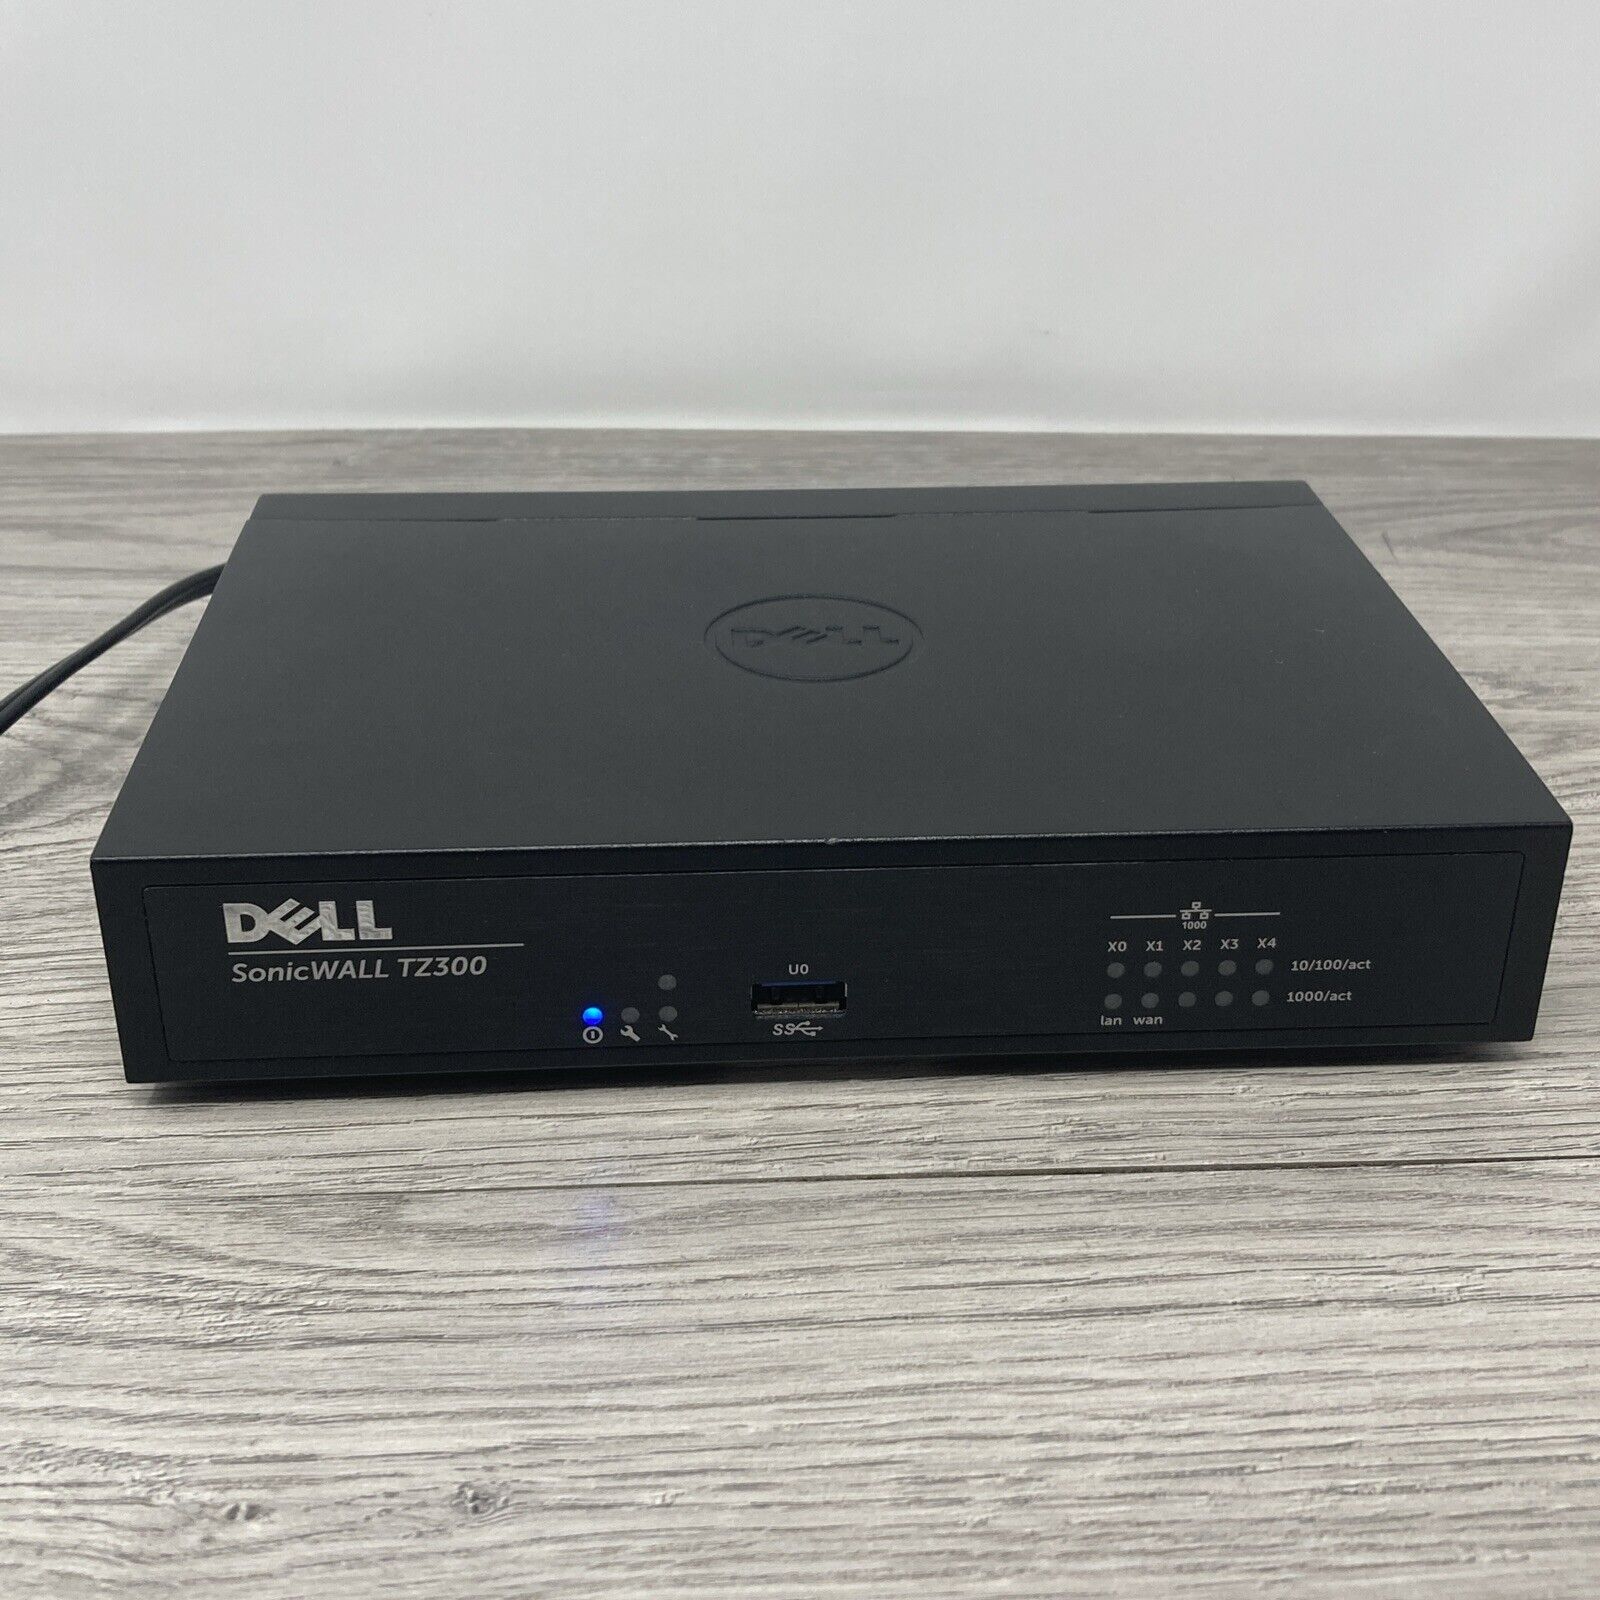 Dell SonicWall TZ300 5 Port Network Security Firewall Appliance APL28-0B4